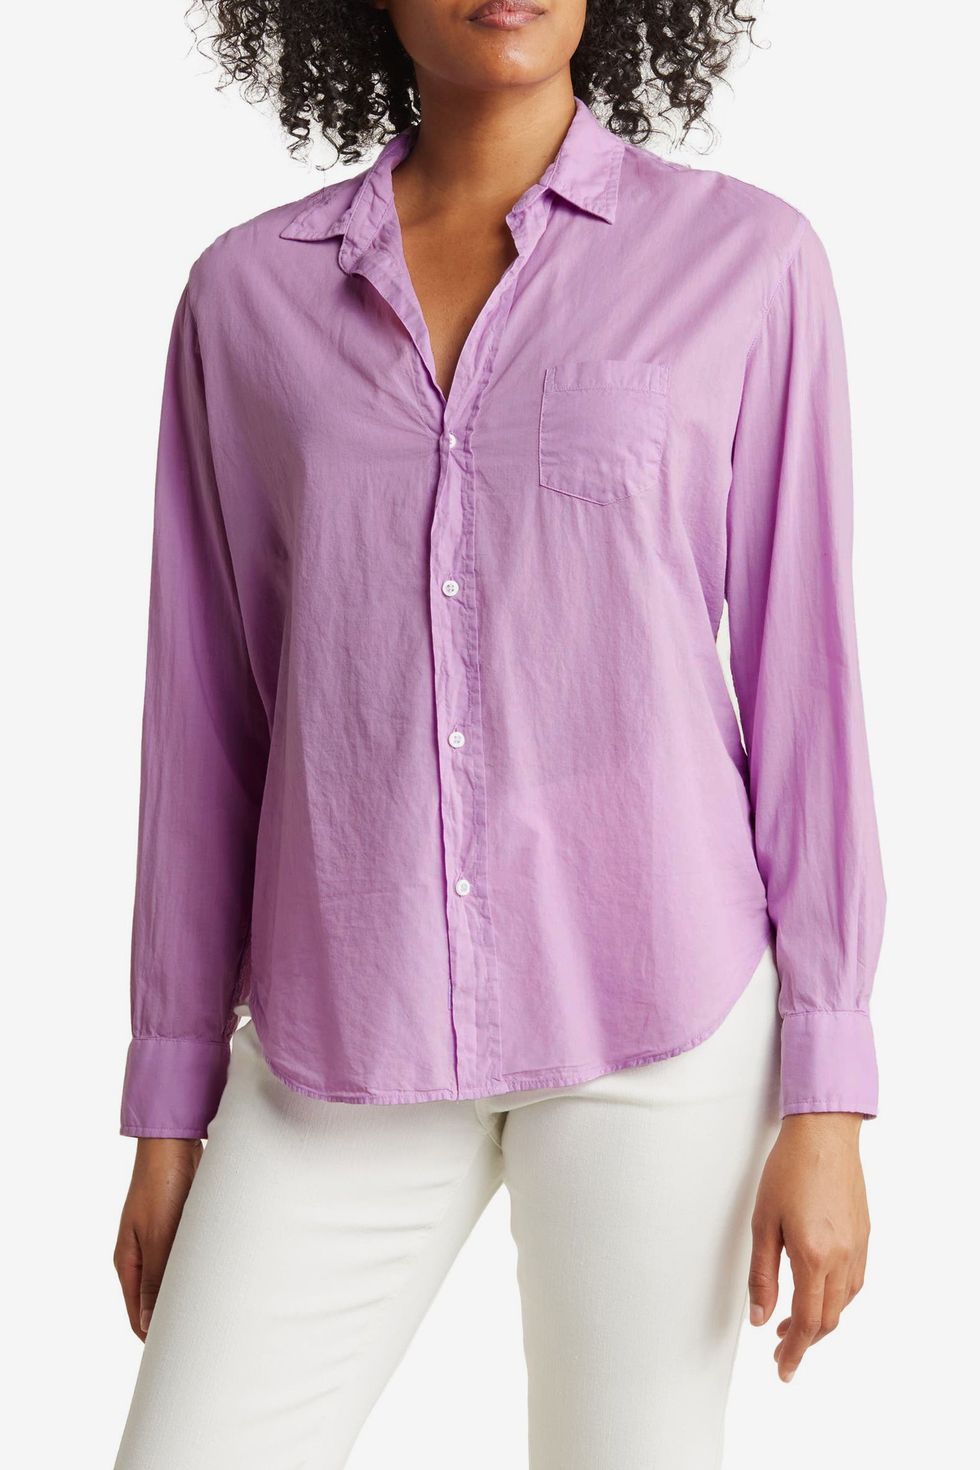 Women's Button Up 100% Cotton Clothing